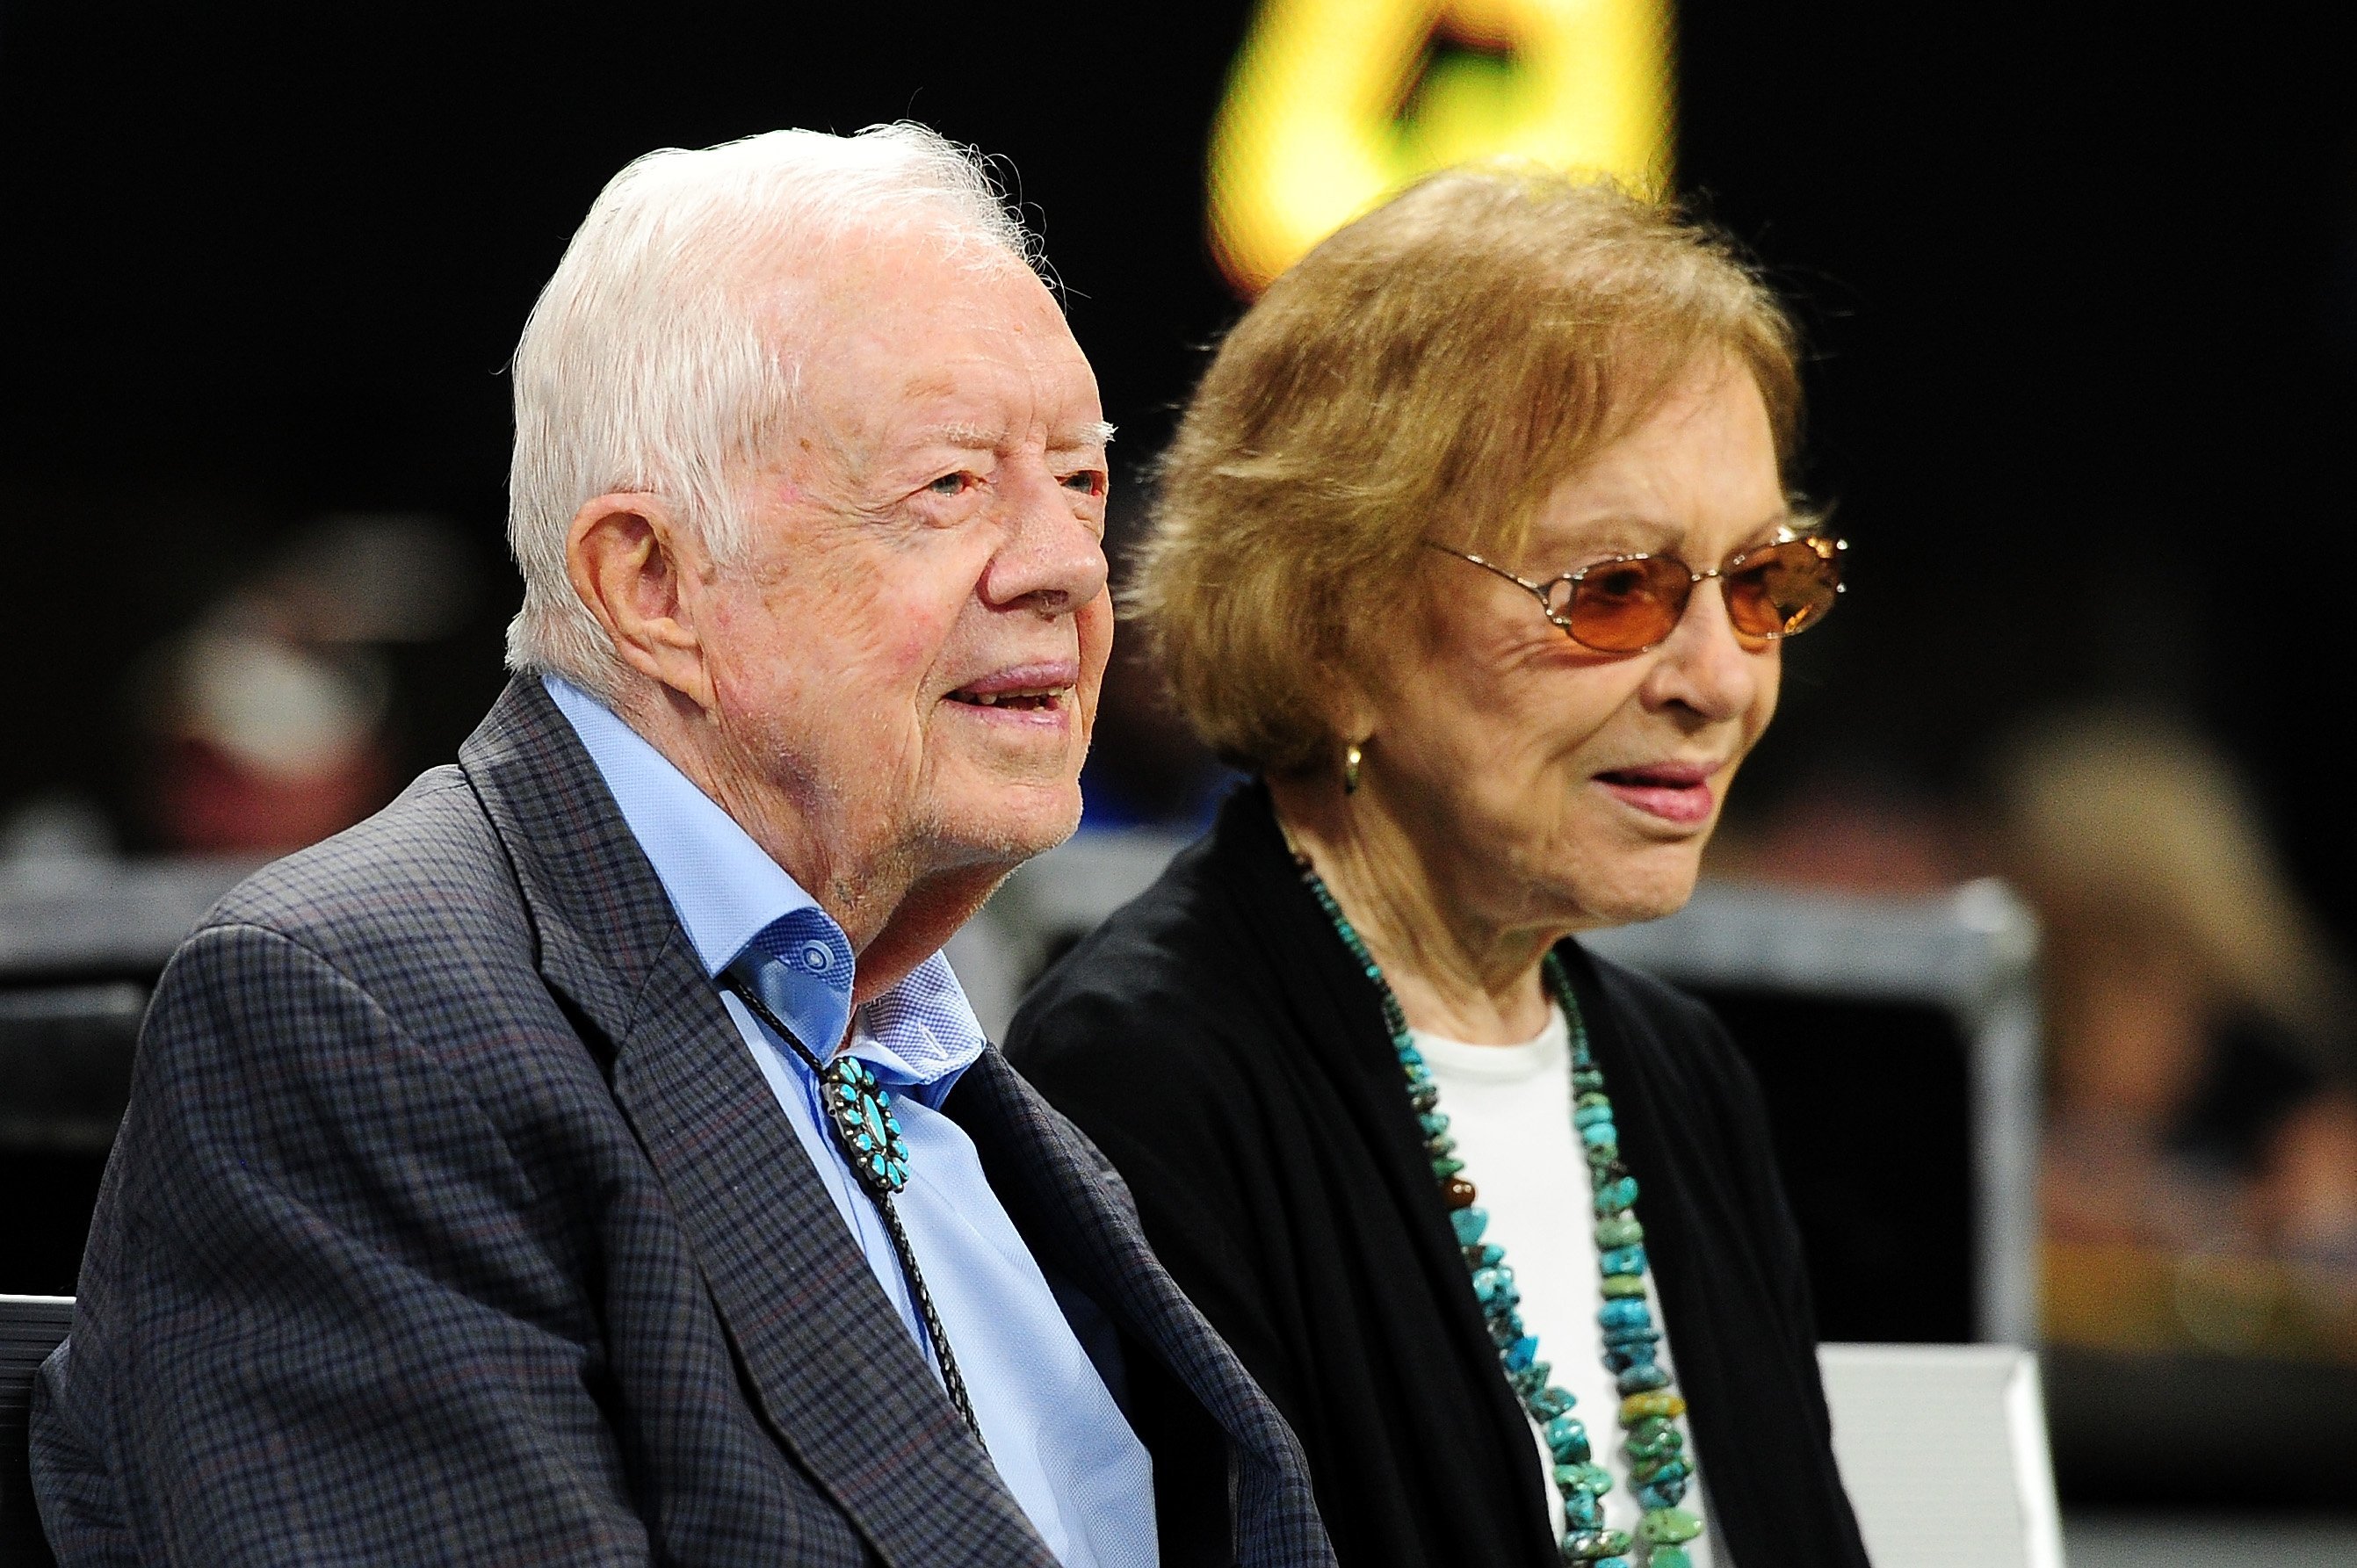 Former President Jimmy Carter and his wife Rosalynn at the Atlanta Falcons and the Cincinnati Bengals held at Mercedes-Benz Stadium on September 30, 2018 in Atlanta, Georgia | Photo: Getty Images